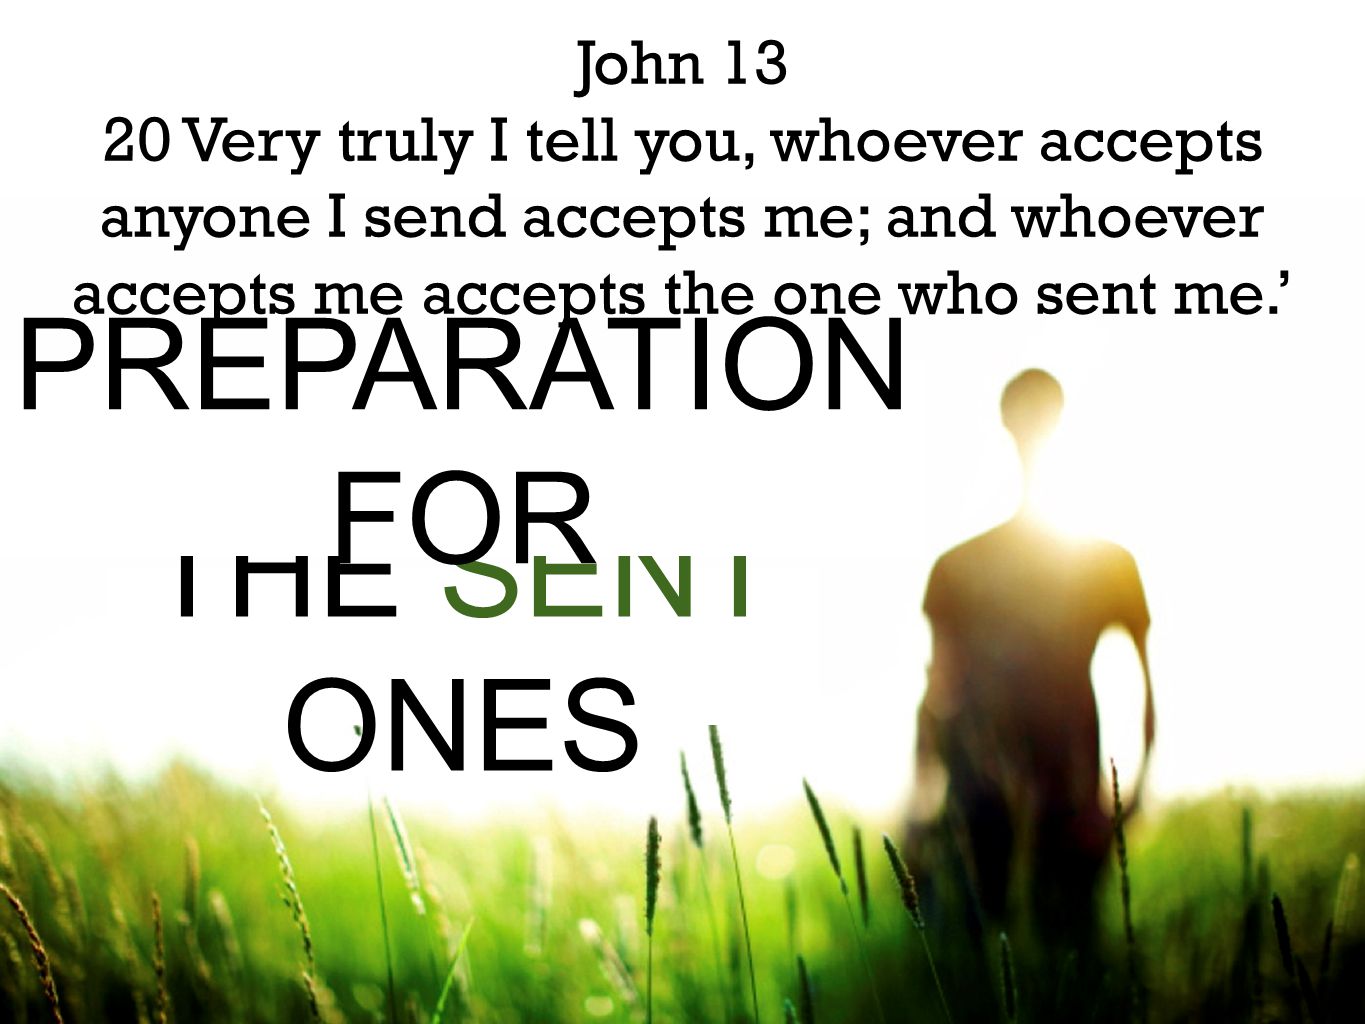 THE SENT ONES John Very truly I tell you, whoever accepts anyone I send accepts me; and whoever accepts me accepts the one who sent me.’ PREPARATION FOR